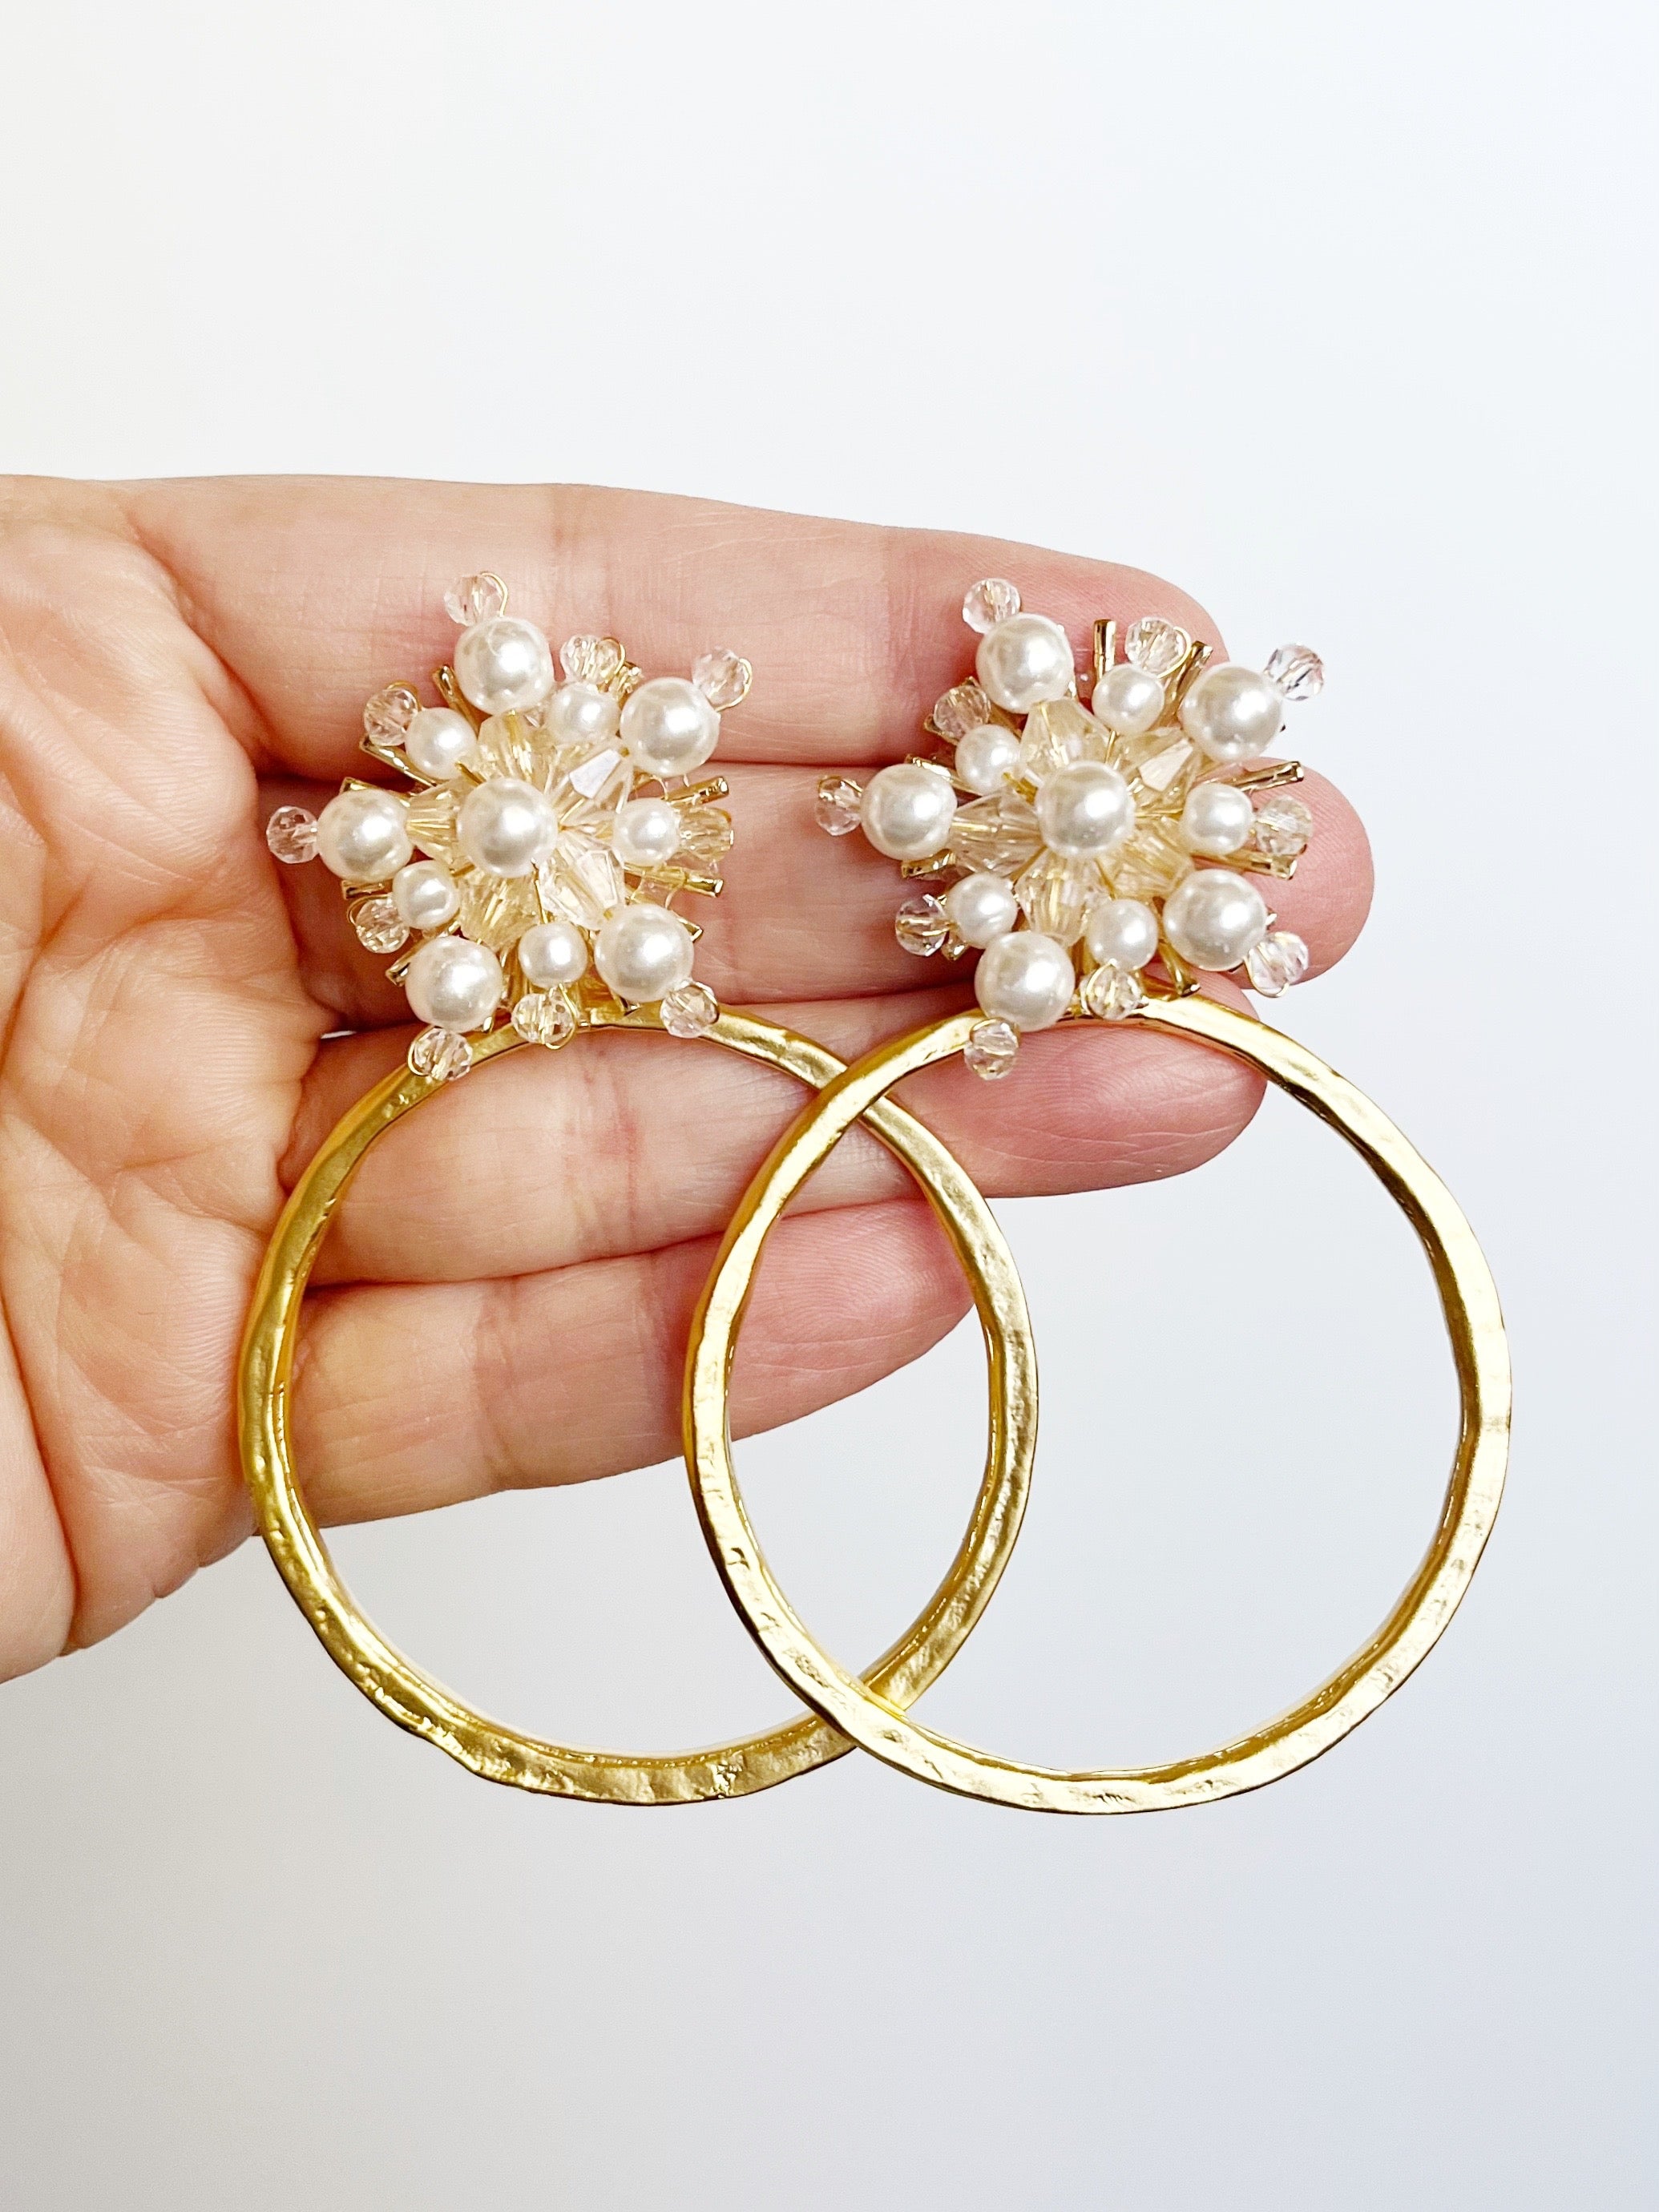 Pearl and Crystal Gold Hoop Earrings | Lynnique Jewelry